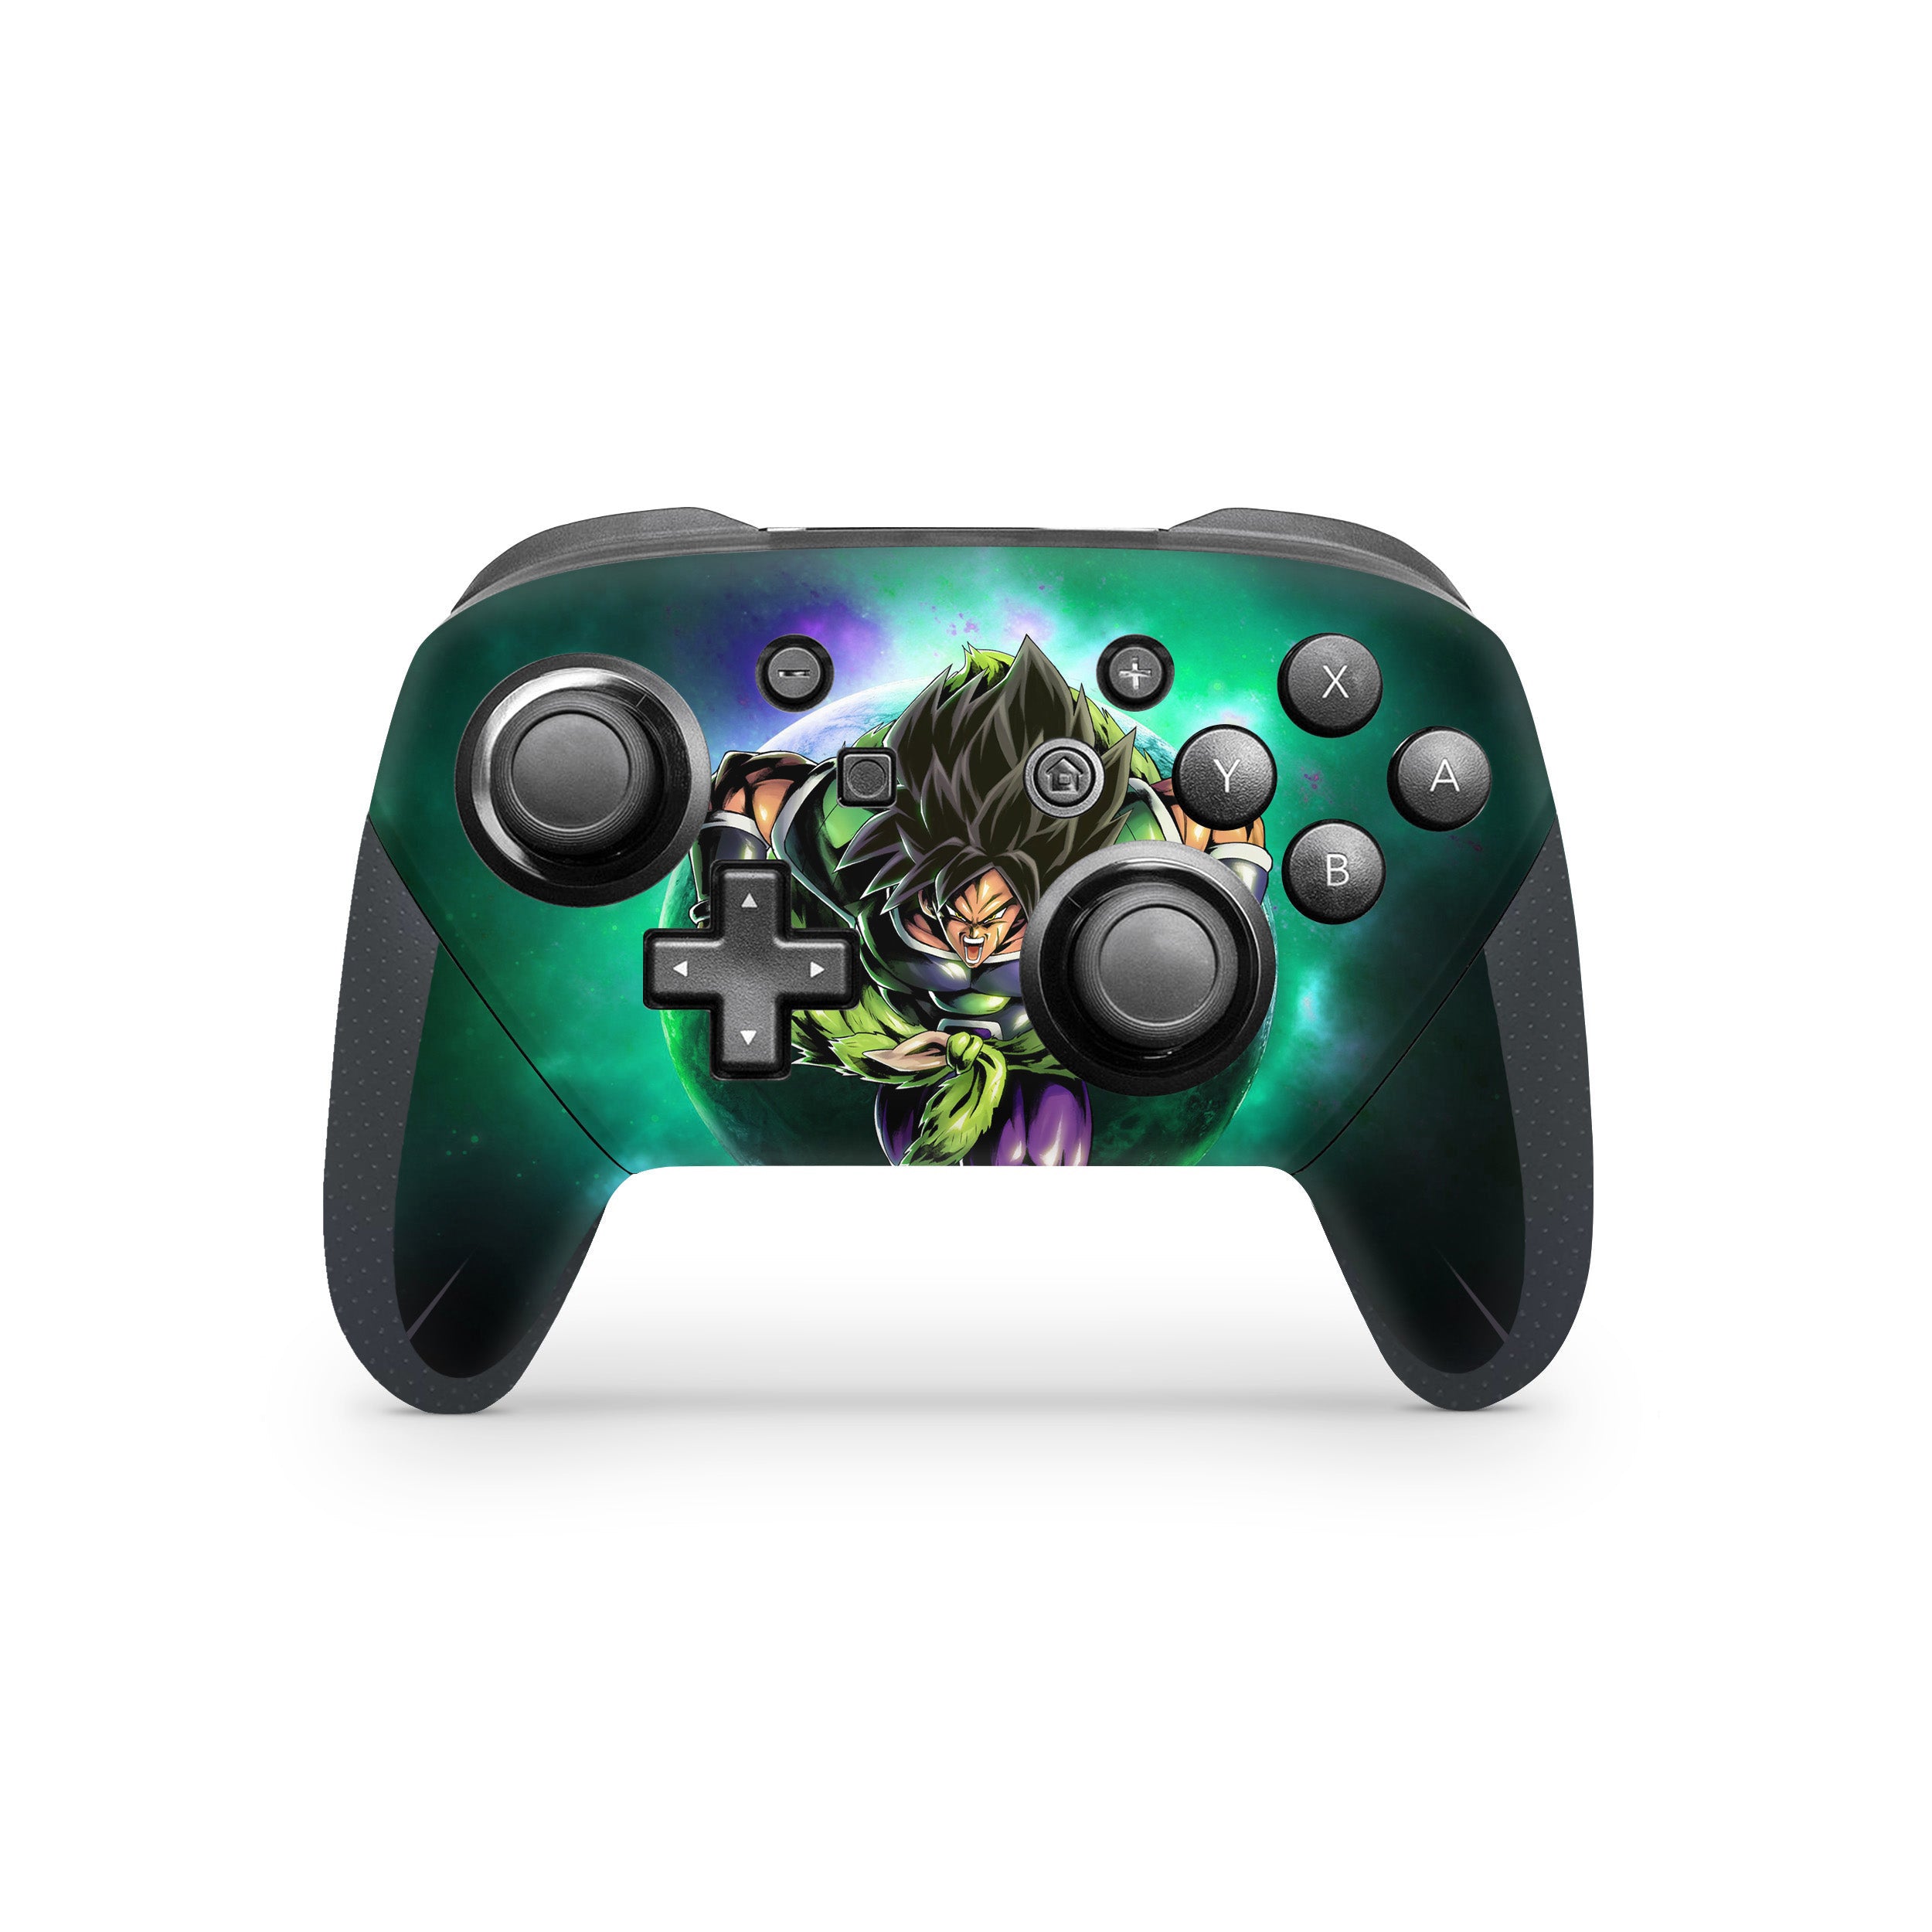 A video game skin featuring a Dragon Ball Super Broly design for the Switch Pro Controller.